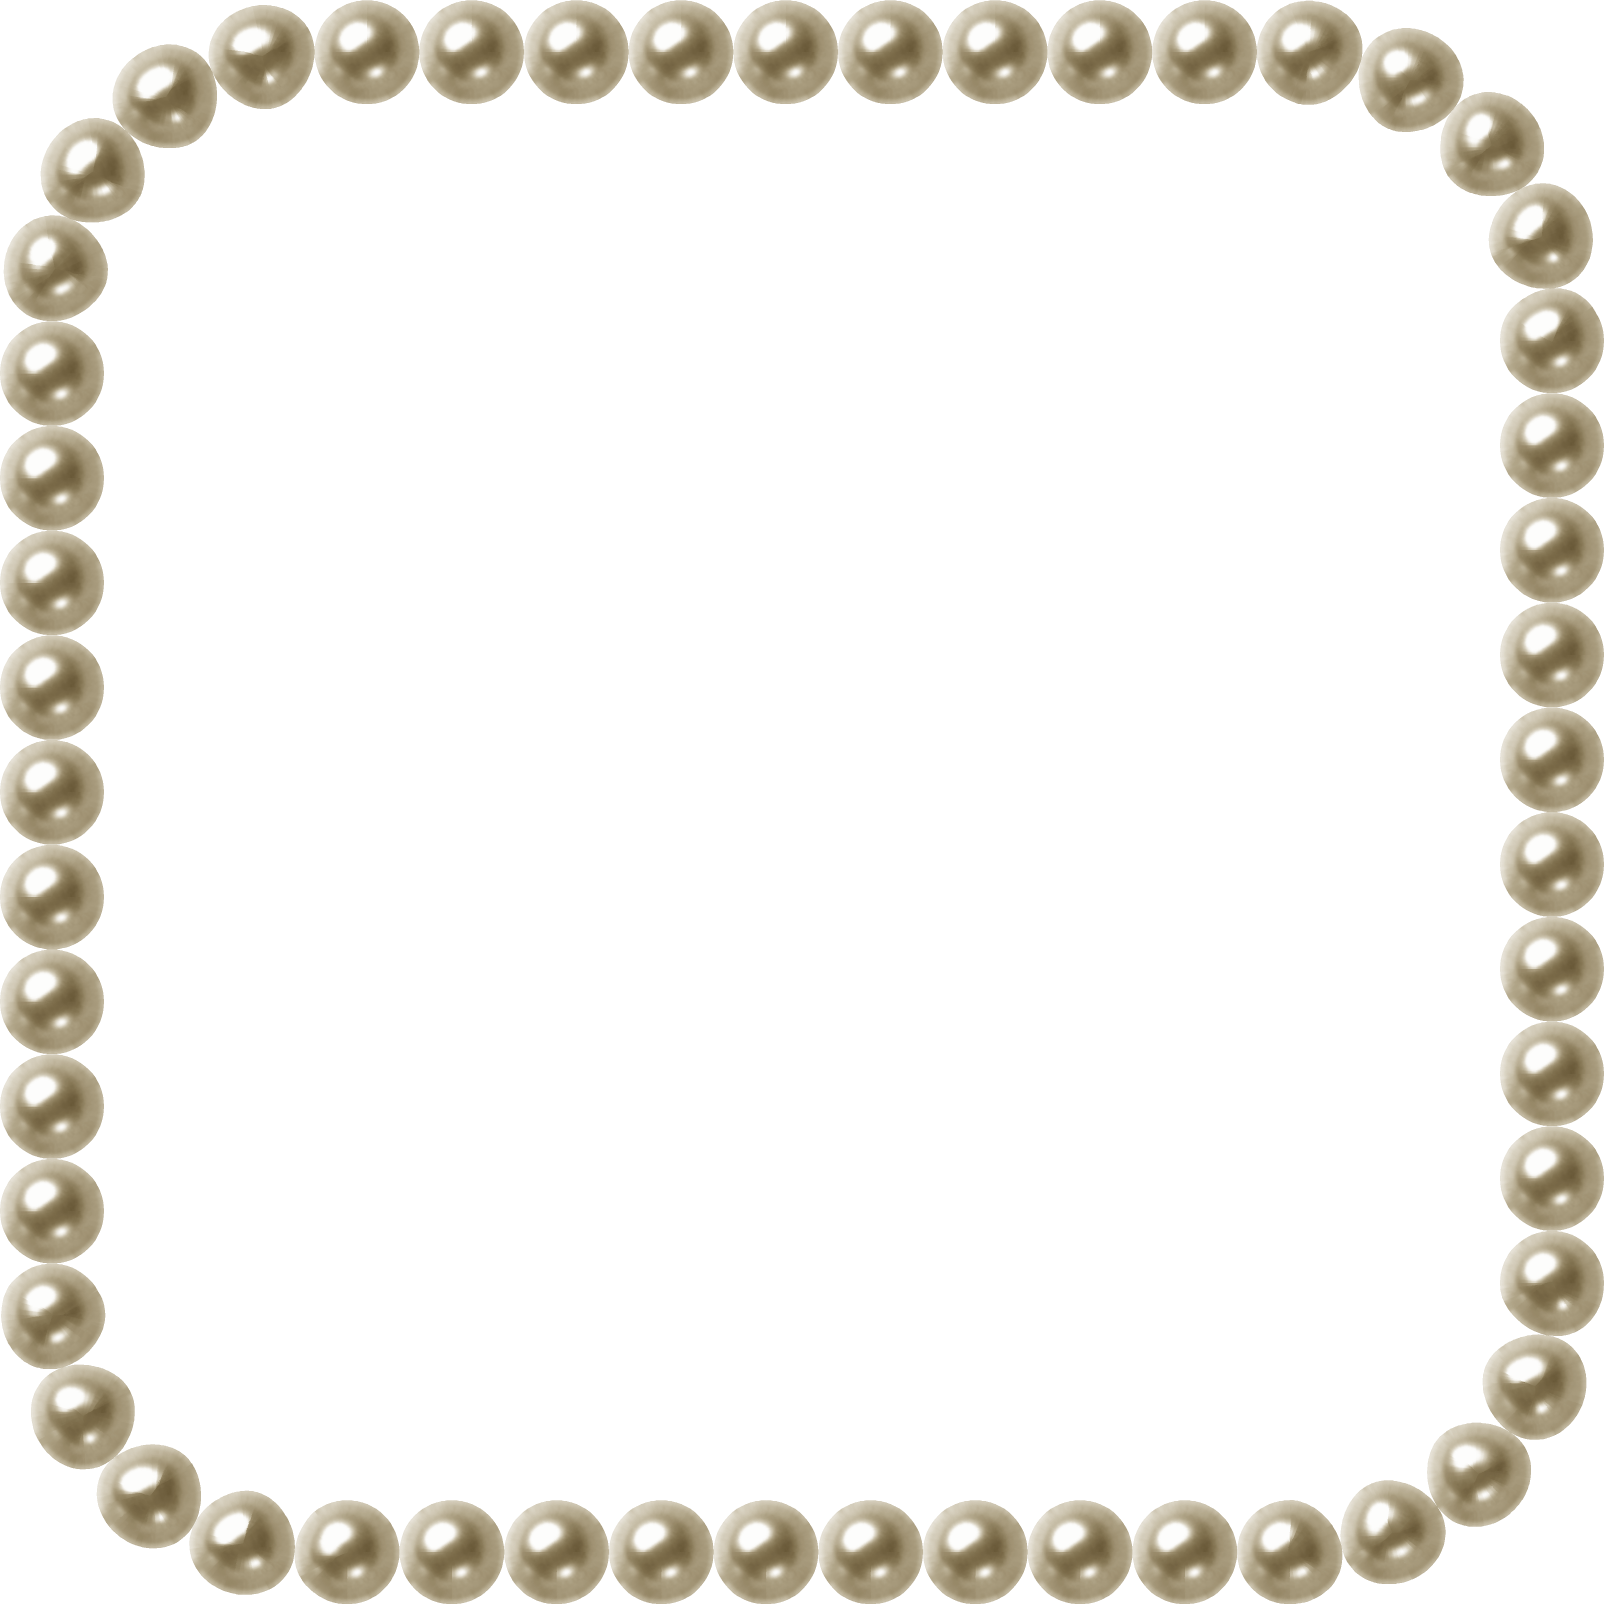 jewelry clipart frame